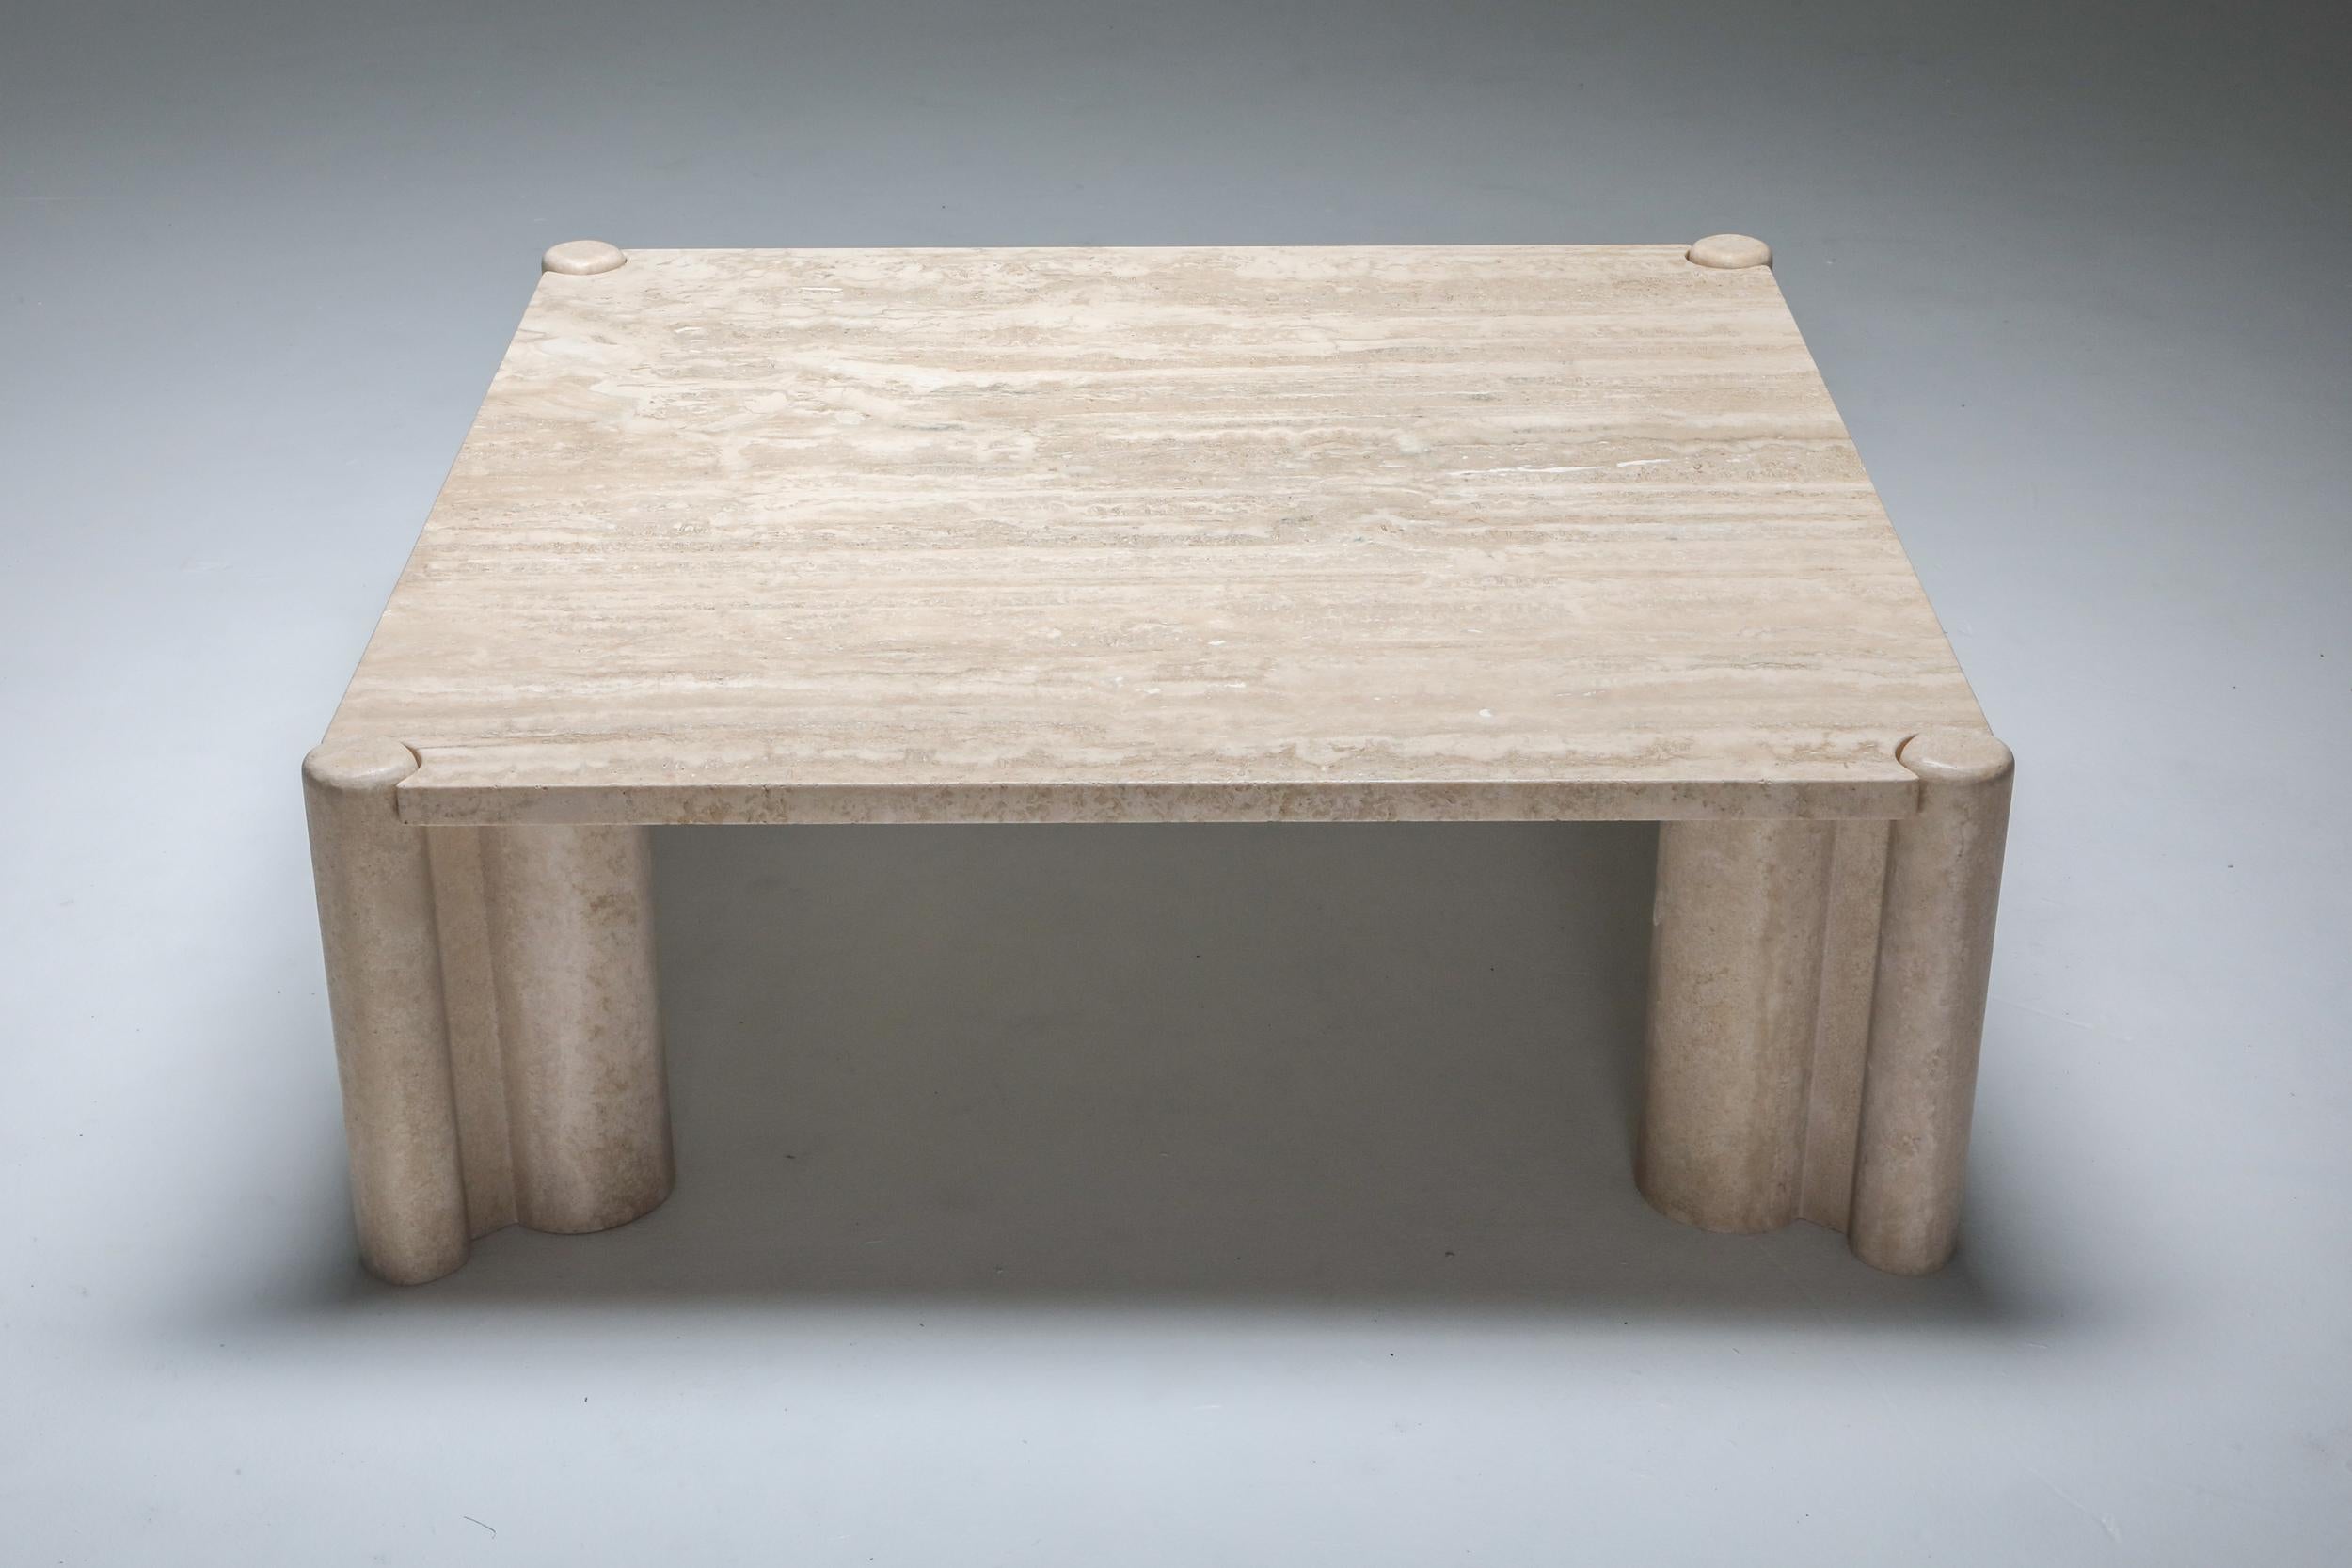 A custom listing for Alexandra.

Mid-Century Modern Italian travertine coffee table by Gae Aulenti, 1965.

The top and the legs come as five separate parts.

Italian architect and designer Gae Aulenti studied architecture at the Politecnico di